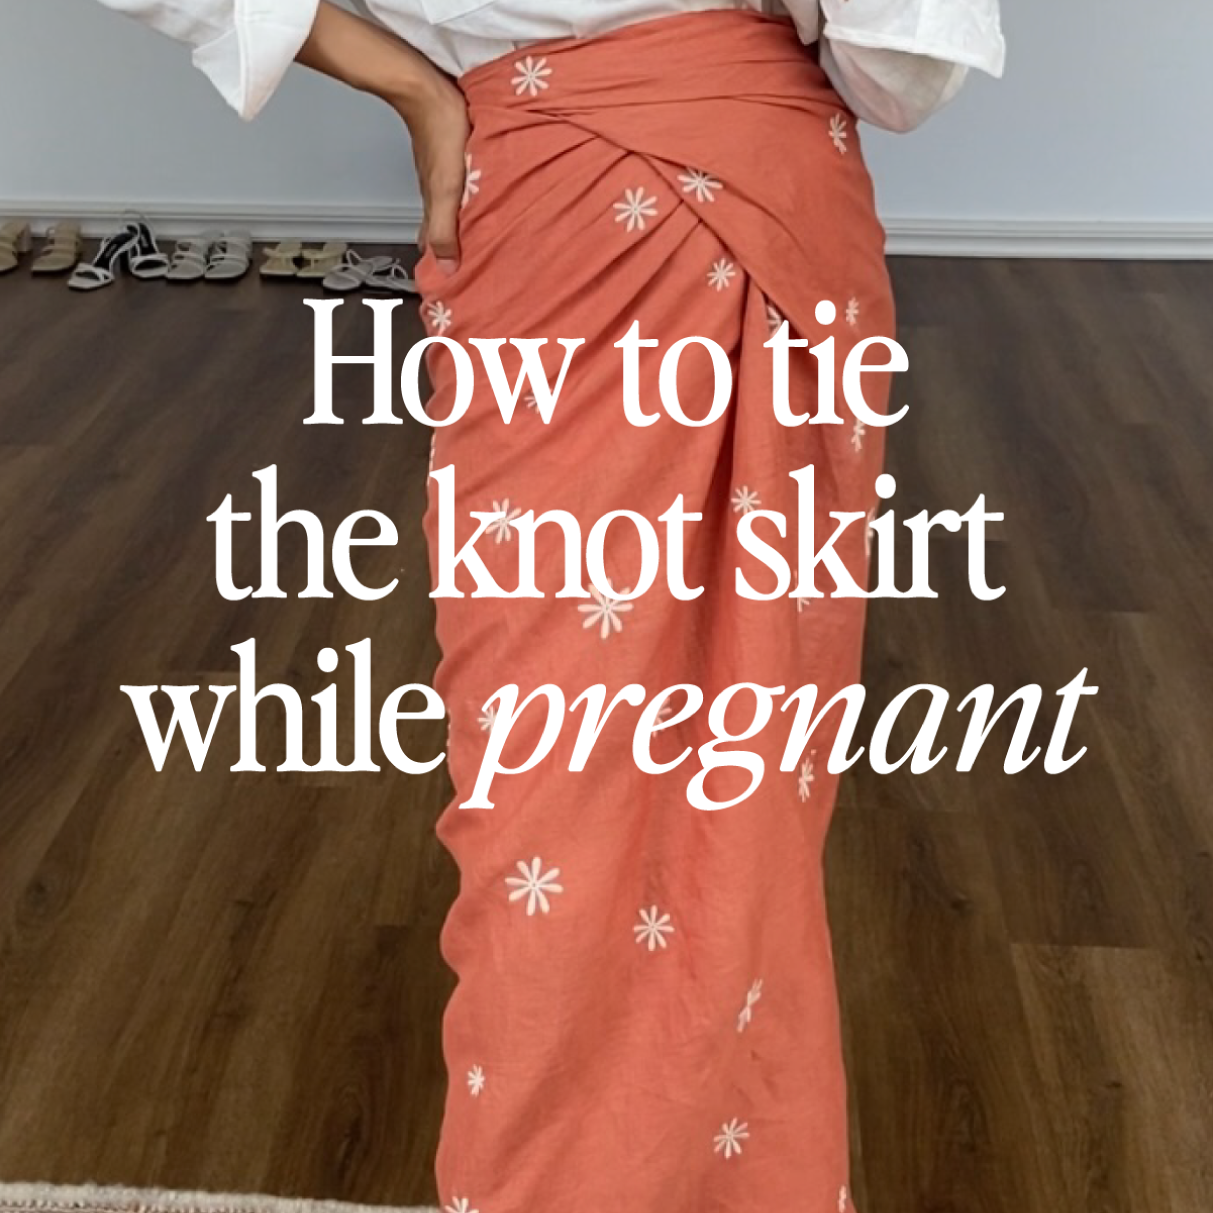 How to tie the knot skirt while pregnant